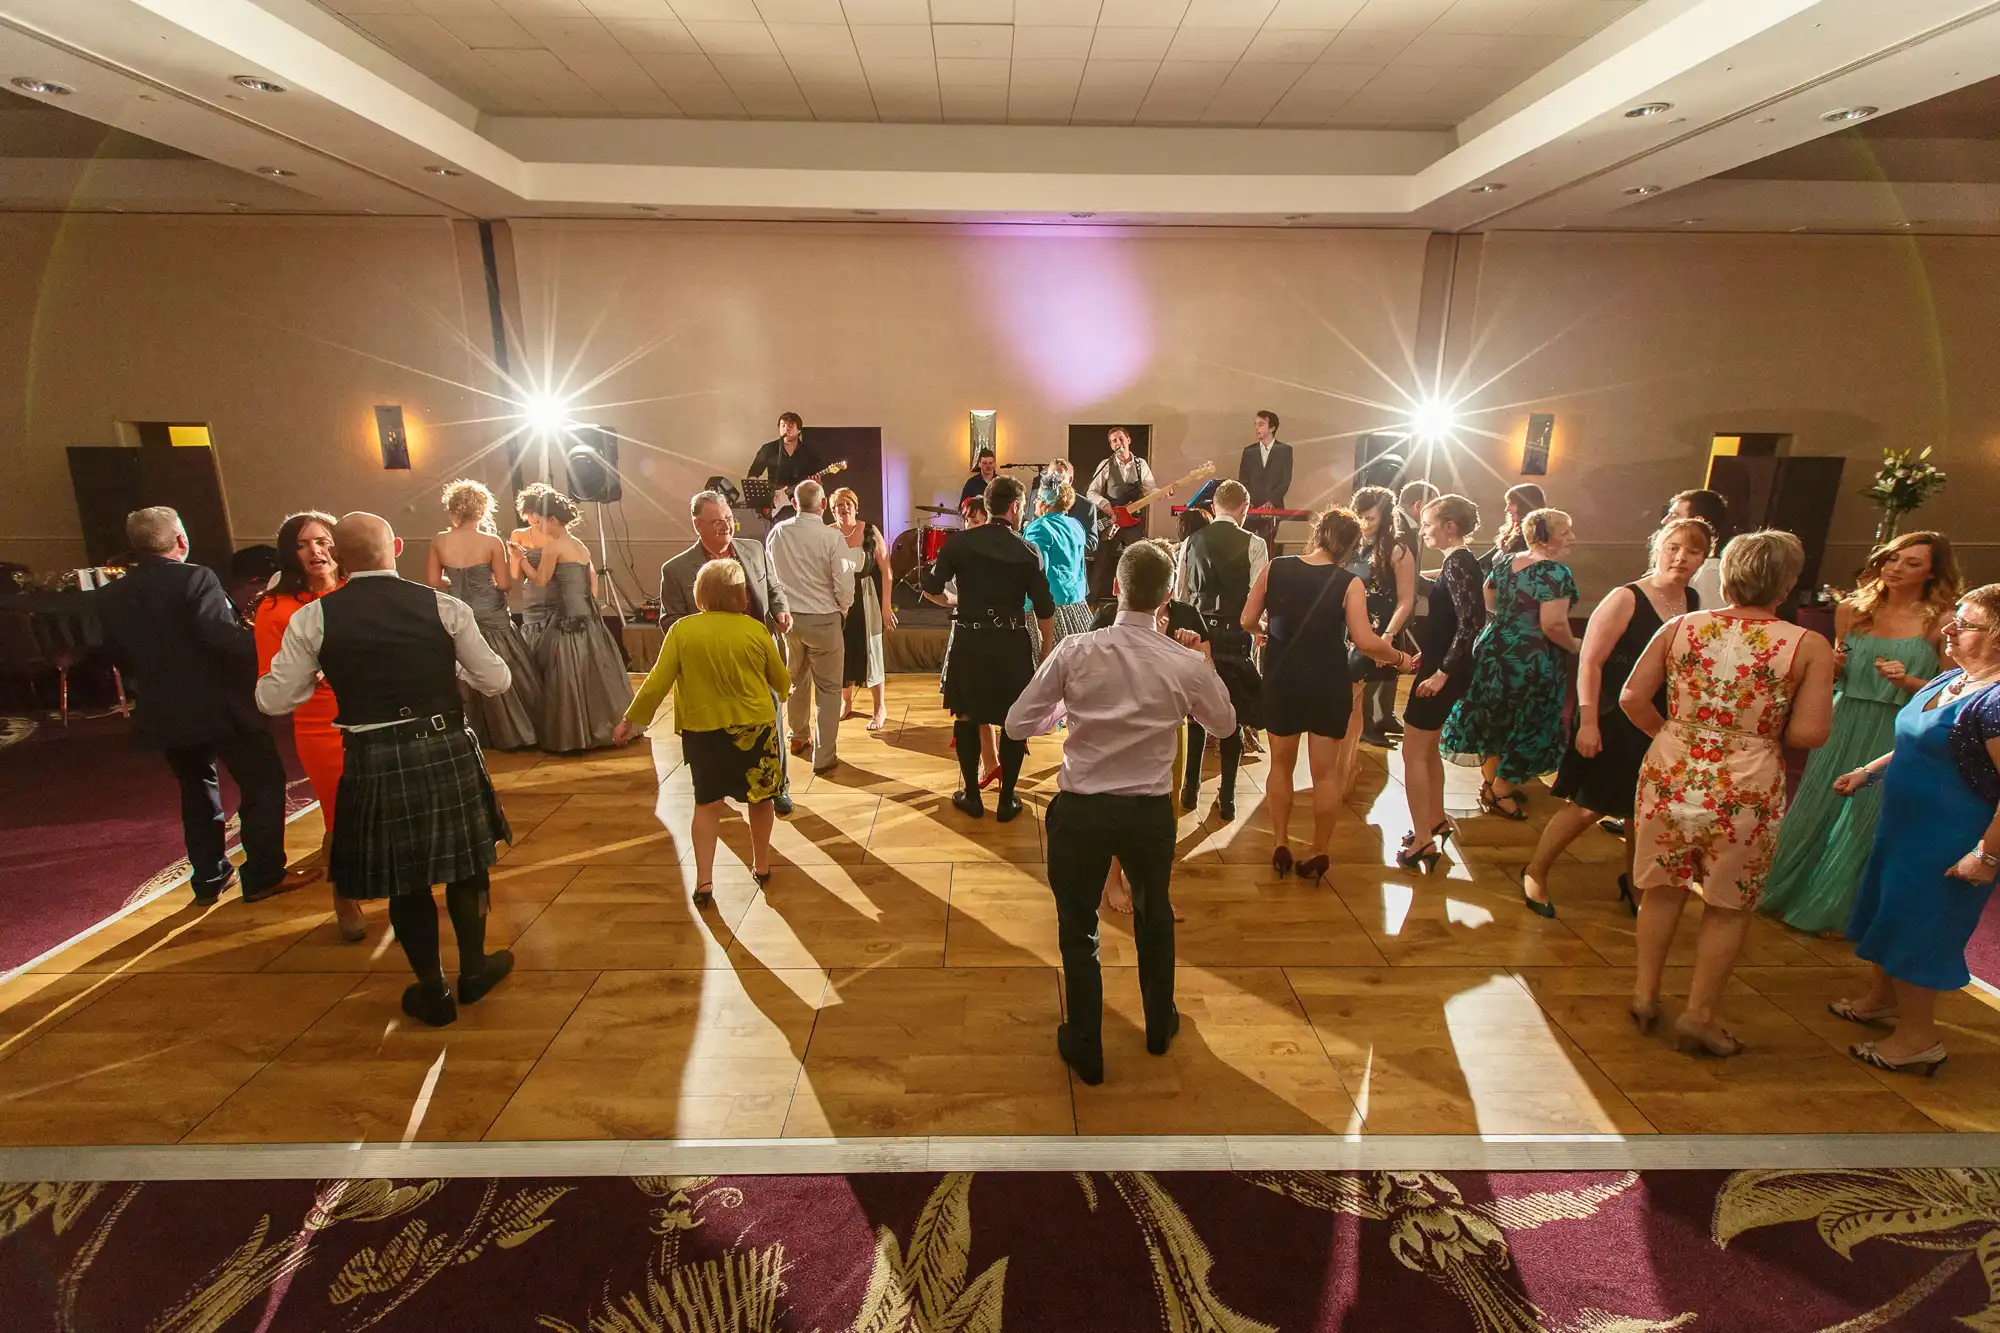 Guests dancing at a wedding reception in a ballroom with a live band playing in the background and colorful lighting.